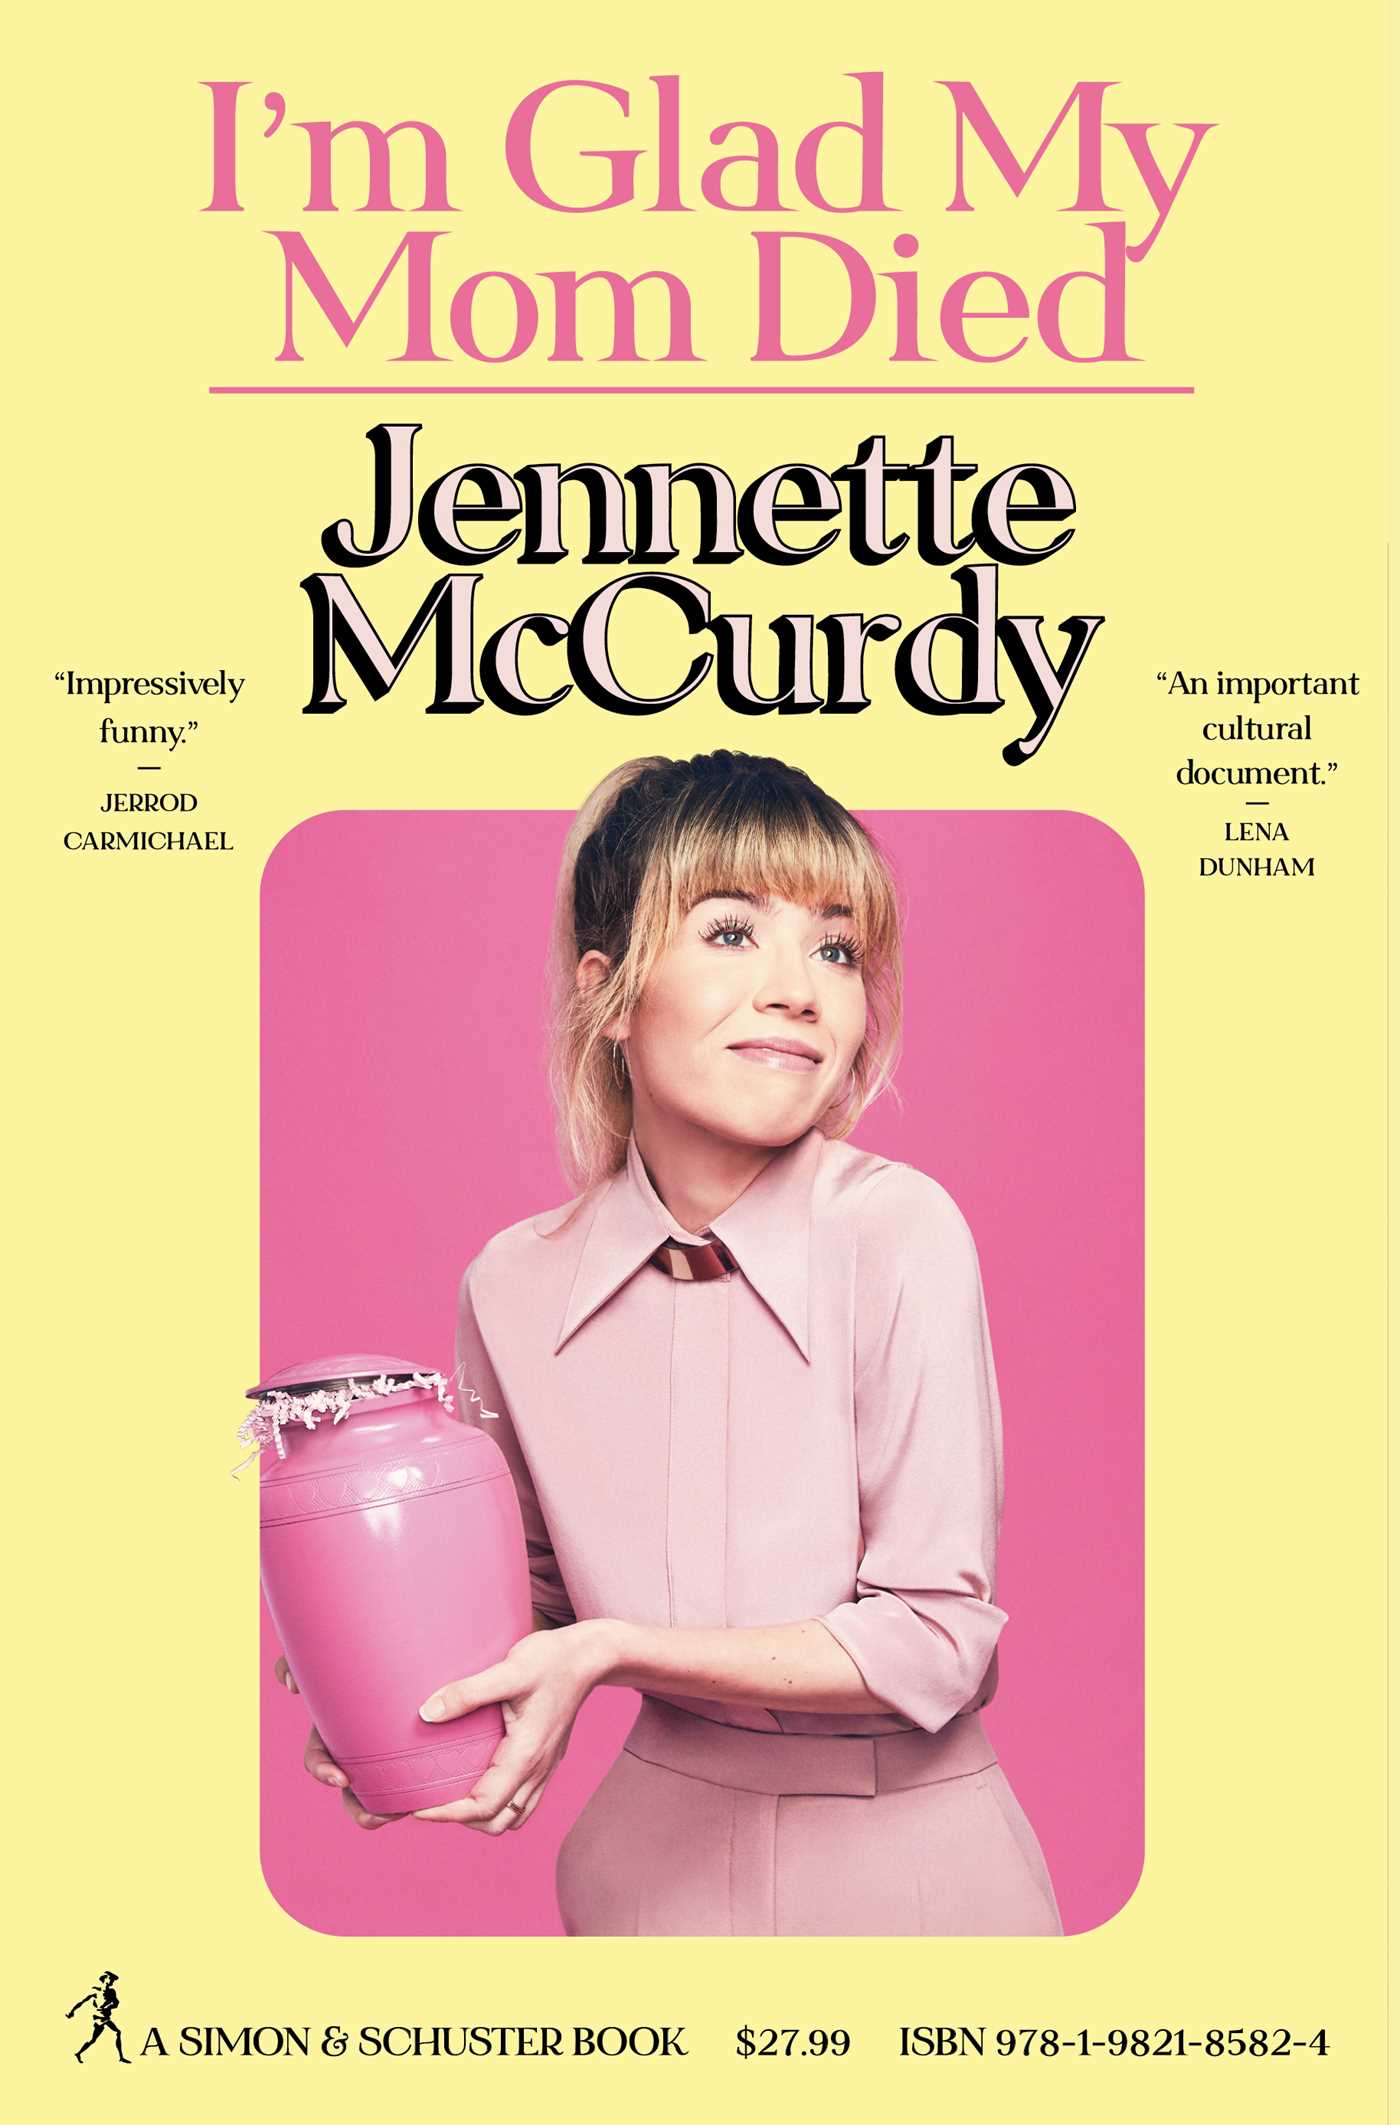 I'm Glad My Mom Died | McCurdy, Jennette